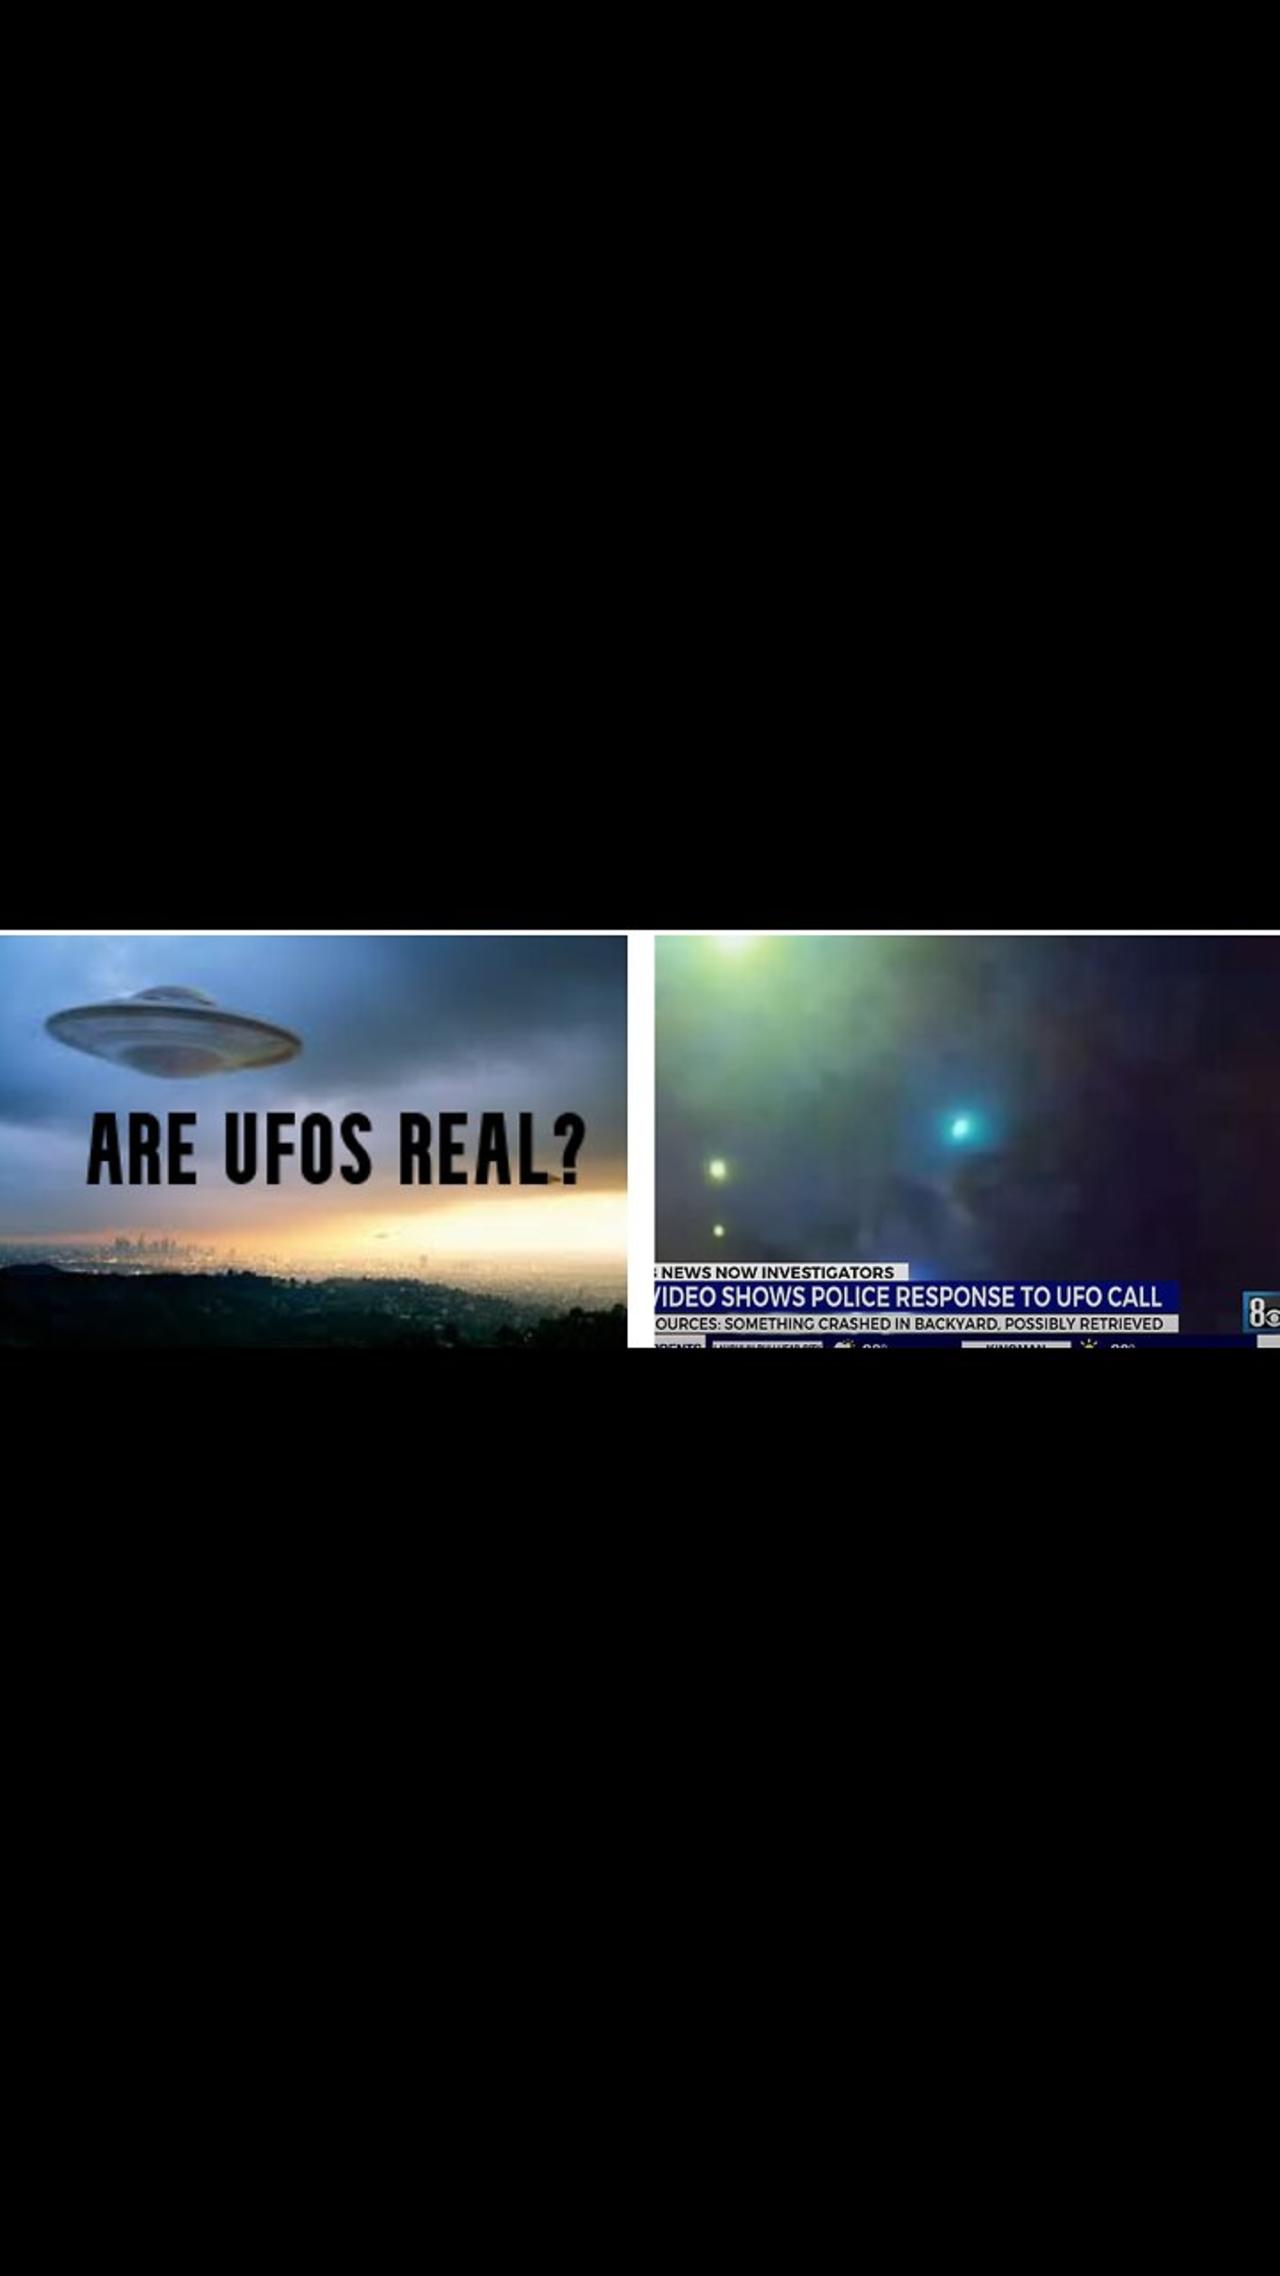 UFO Crashes in Las Vegas it seems -Police capture the crash on bodycam residents say they saw aliens